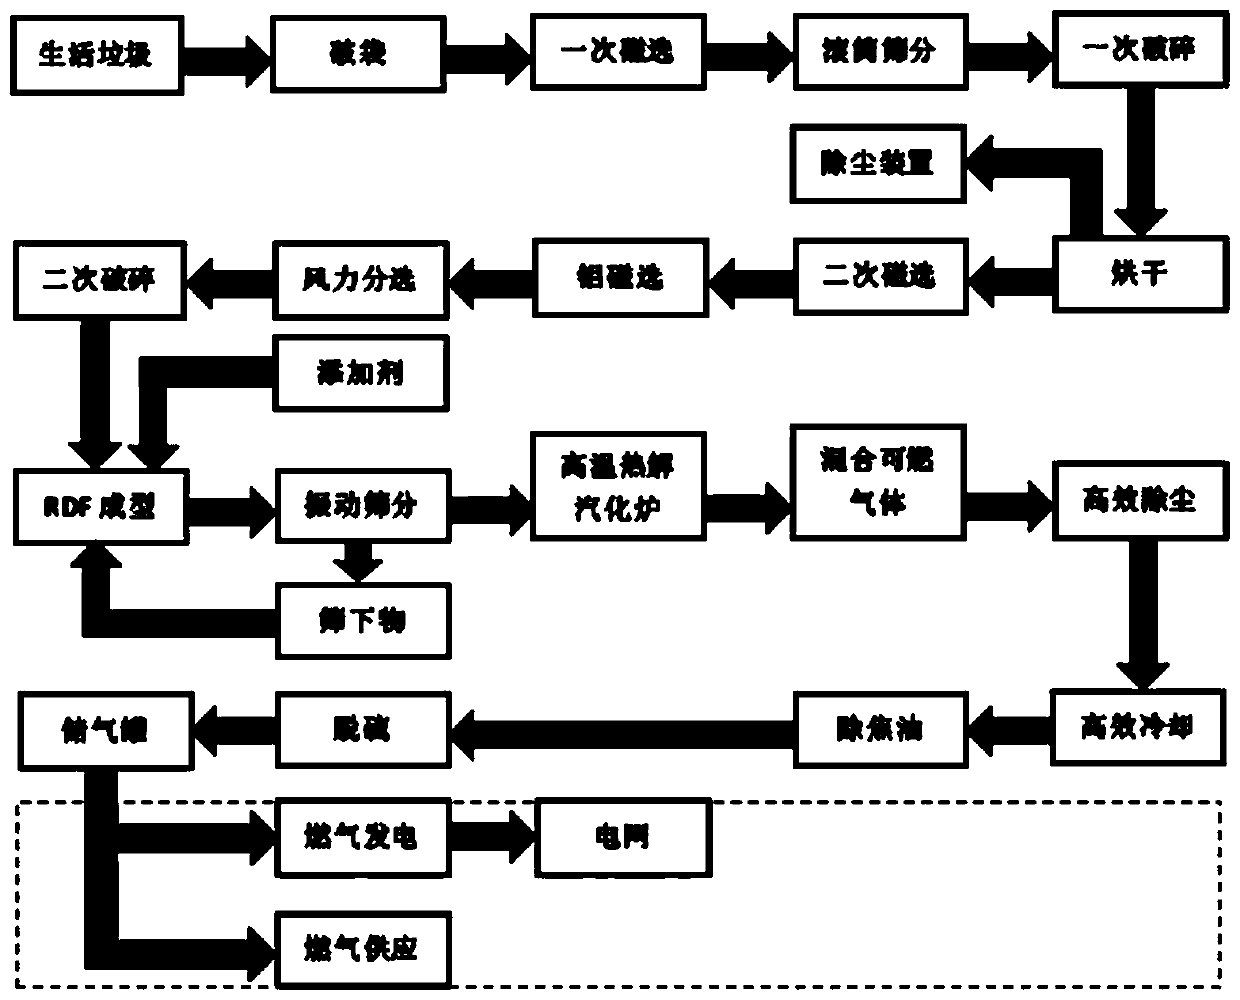 Process for making RDF from domestic garbage and high-temperature pyrolysis gasification treatment